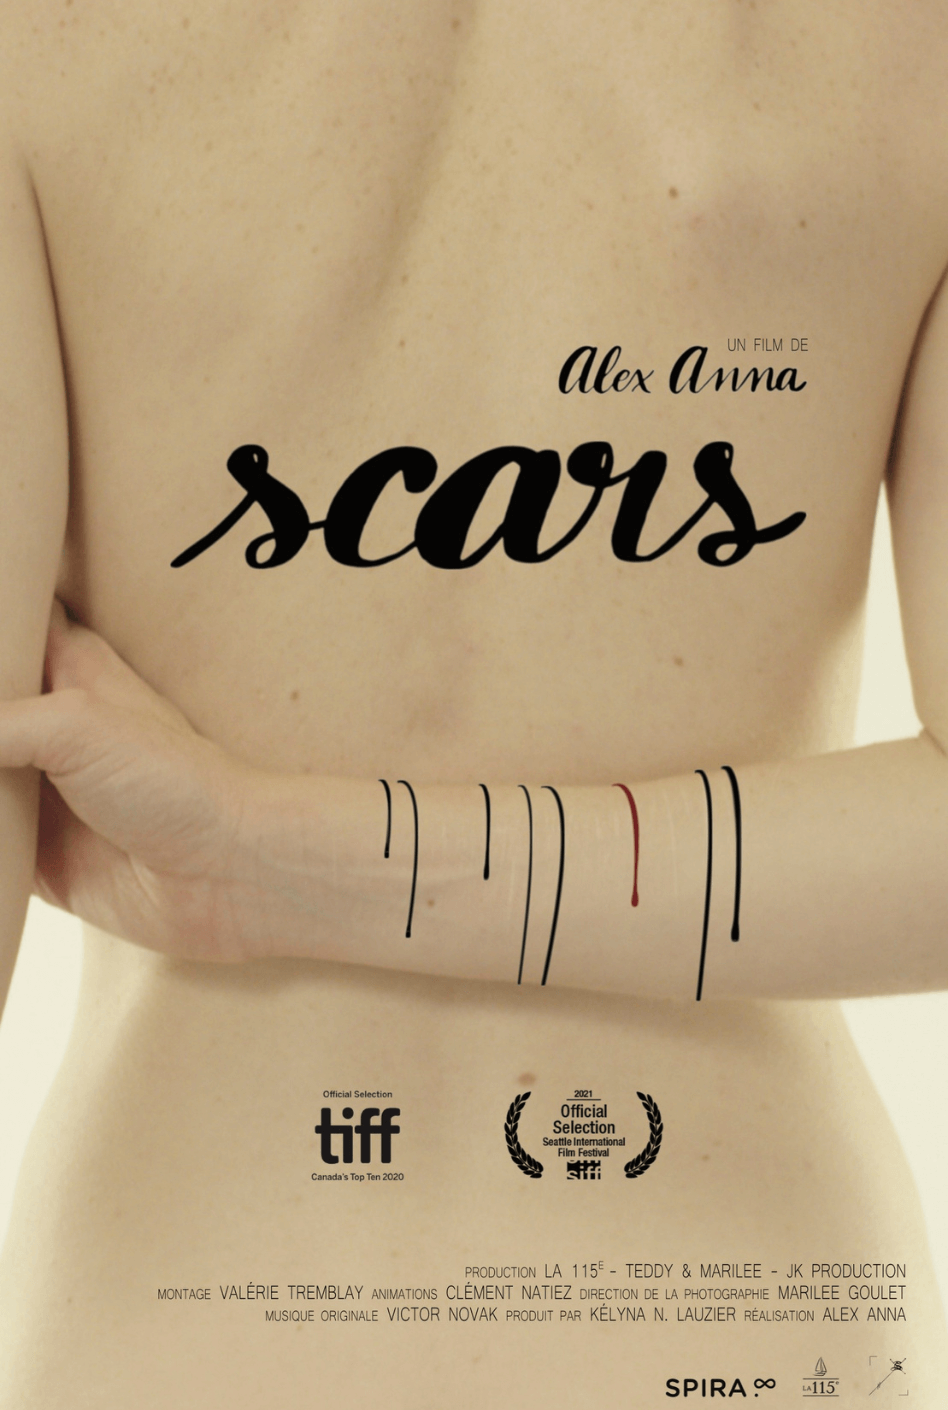 images/bottin_films/cf0e10e013a0834f5696a4a16882d71a-Scars-affiche-poster.png#joomlaImage://local-images/bottin_films/cf0e10e013a0834f5696a4a16882d71a-Scars-affiche-poster.png?width=948&height=1410